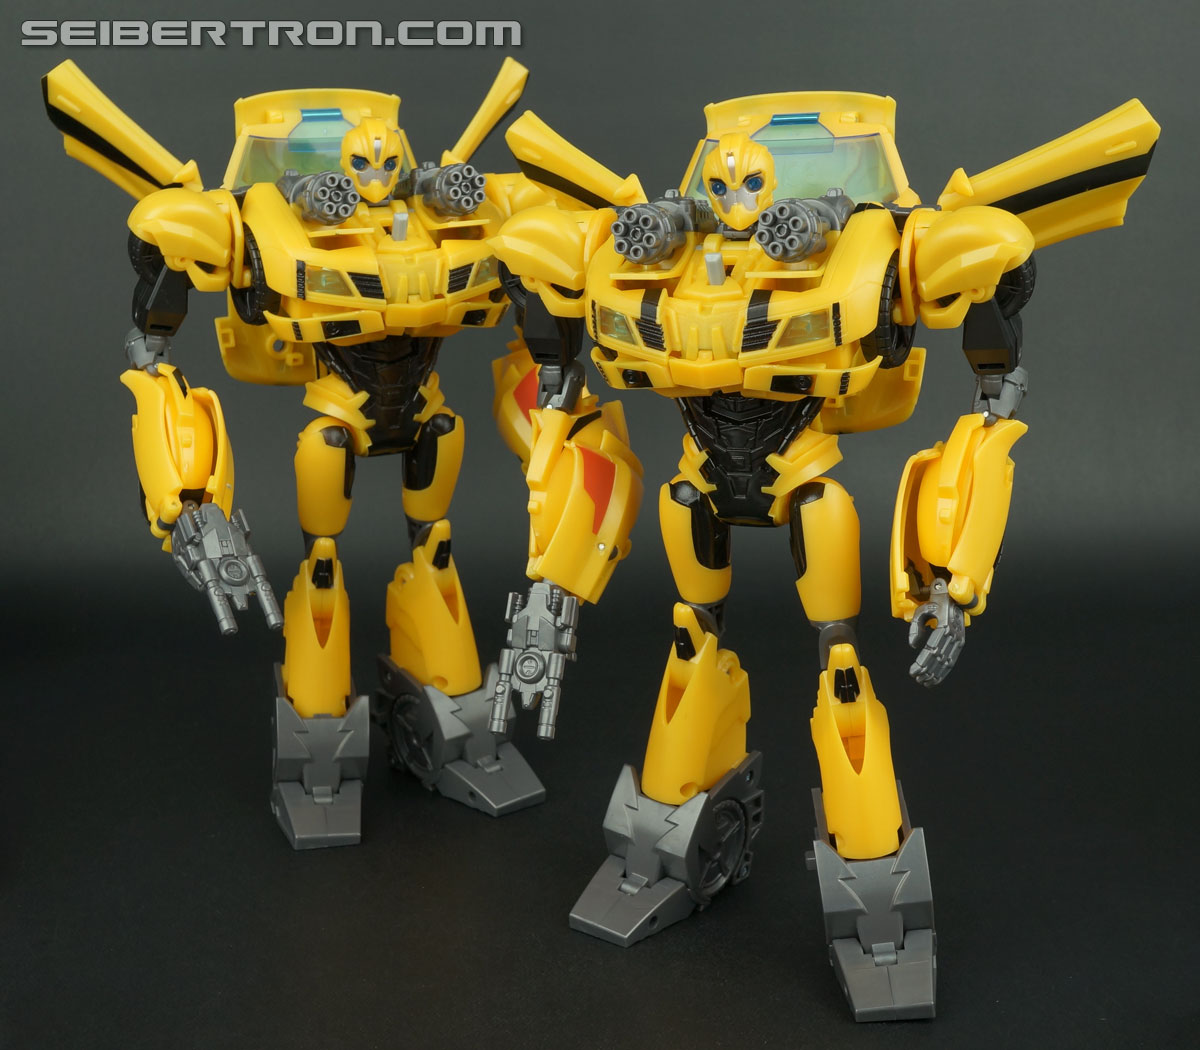 Transformers Prime: Robots In Disguise Bumblebee (Image #112 of 114)